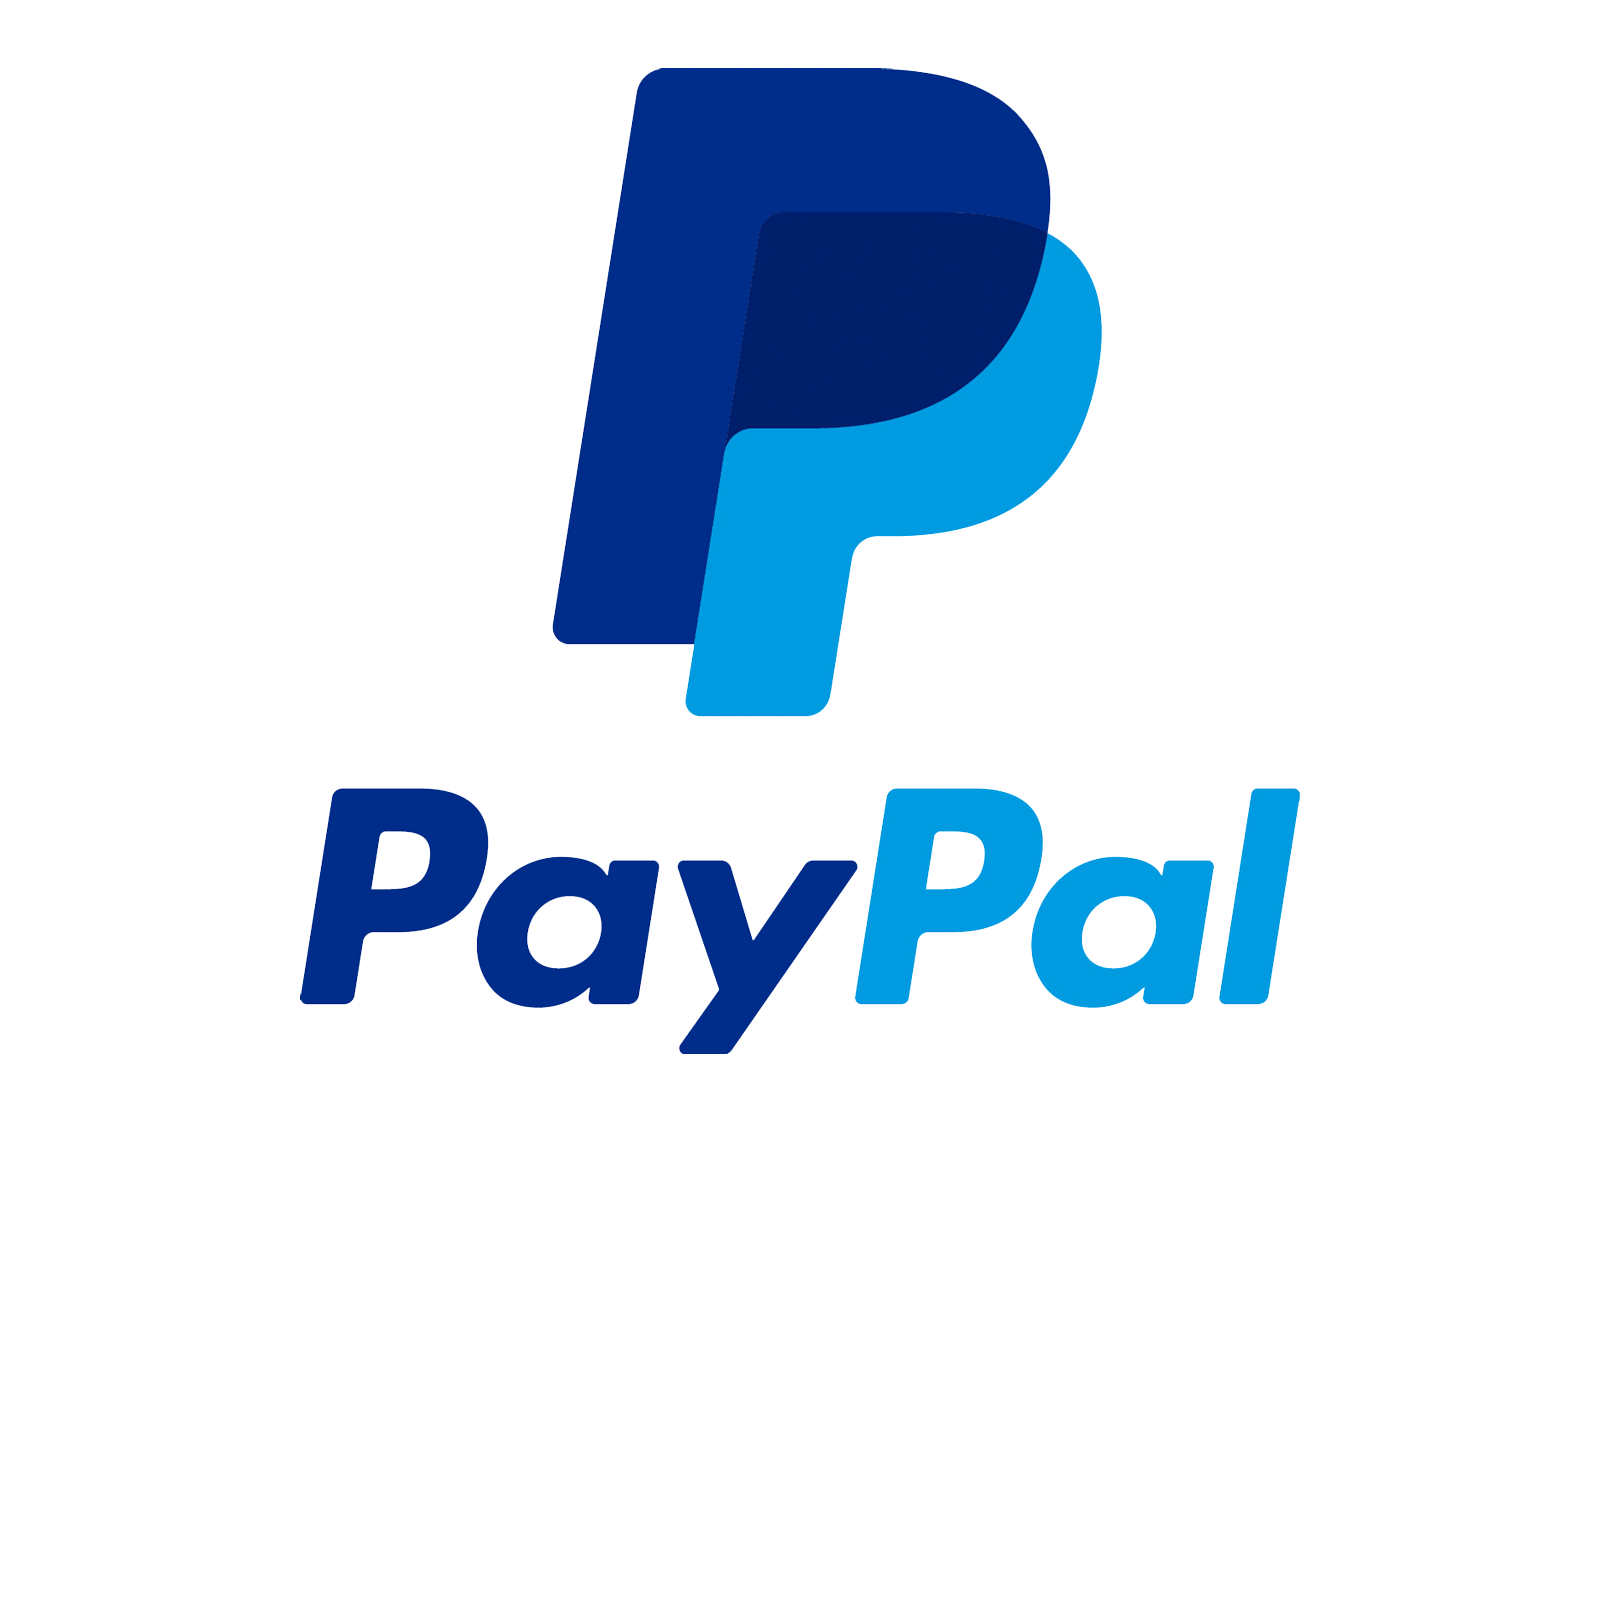  PayPal